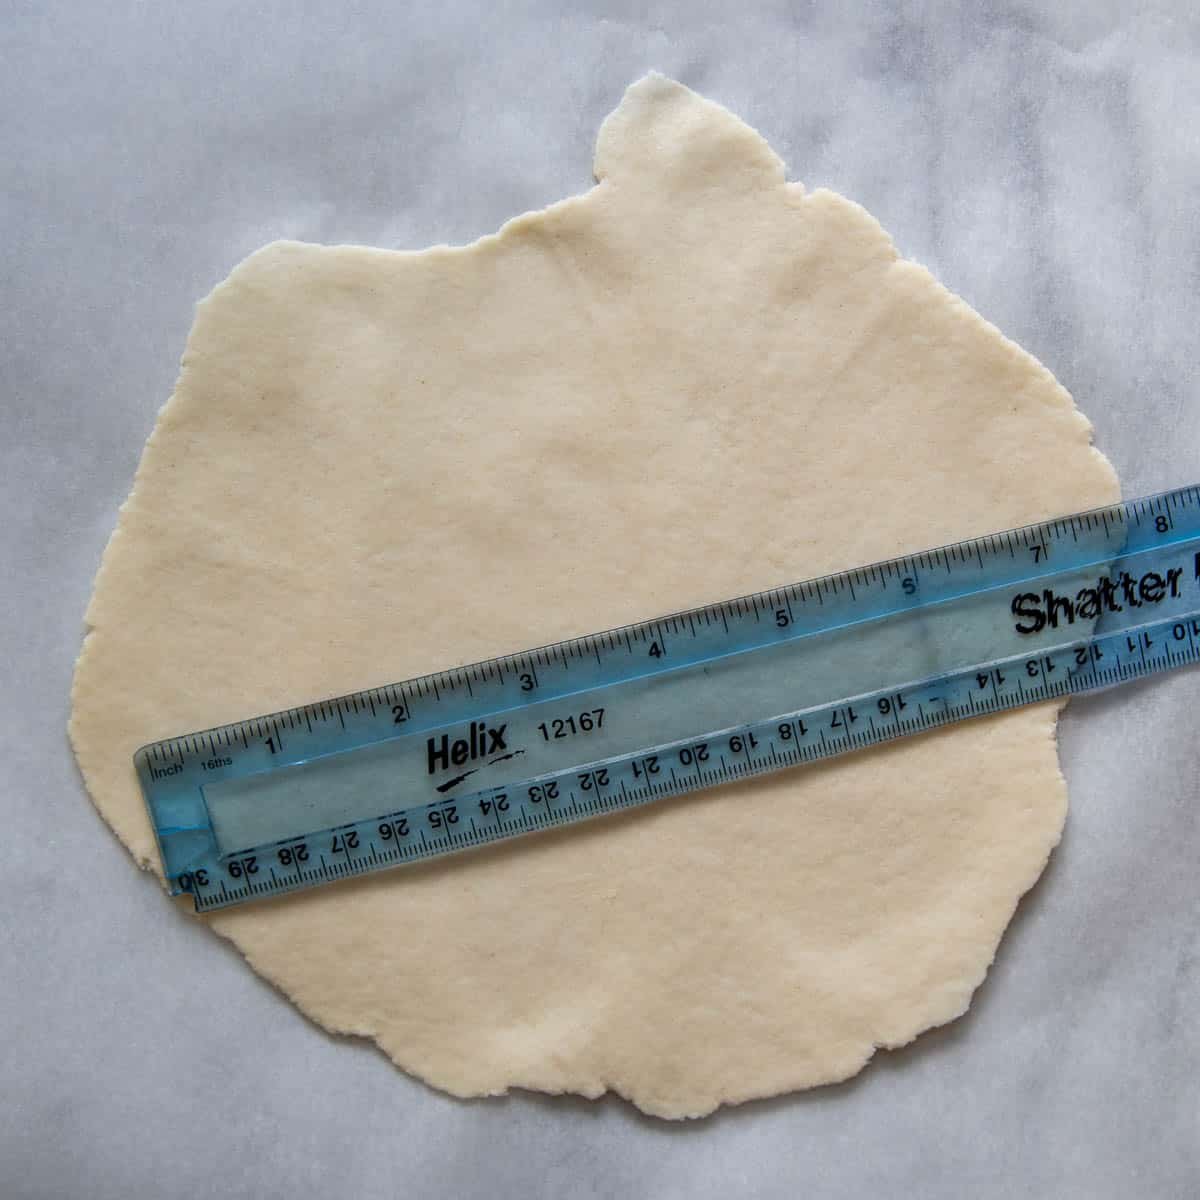 a rolled tortilla with a ruler on it.